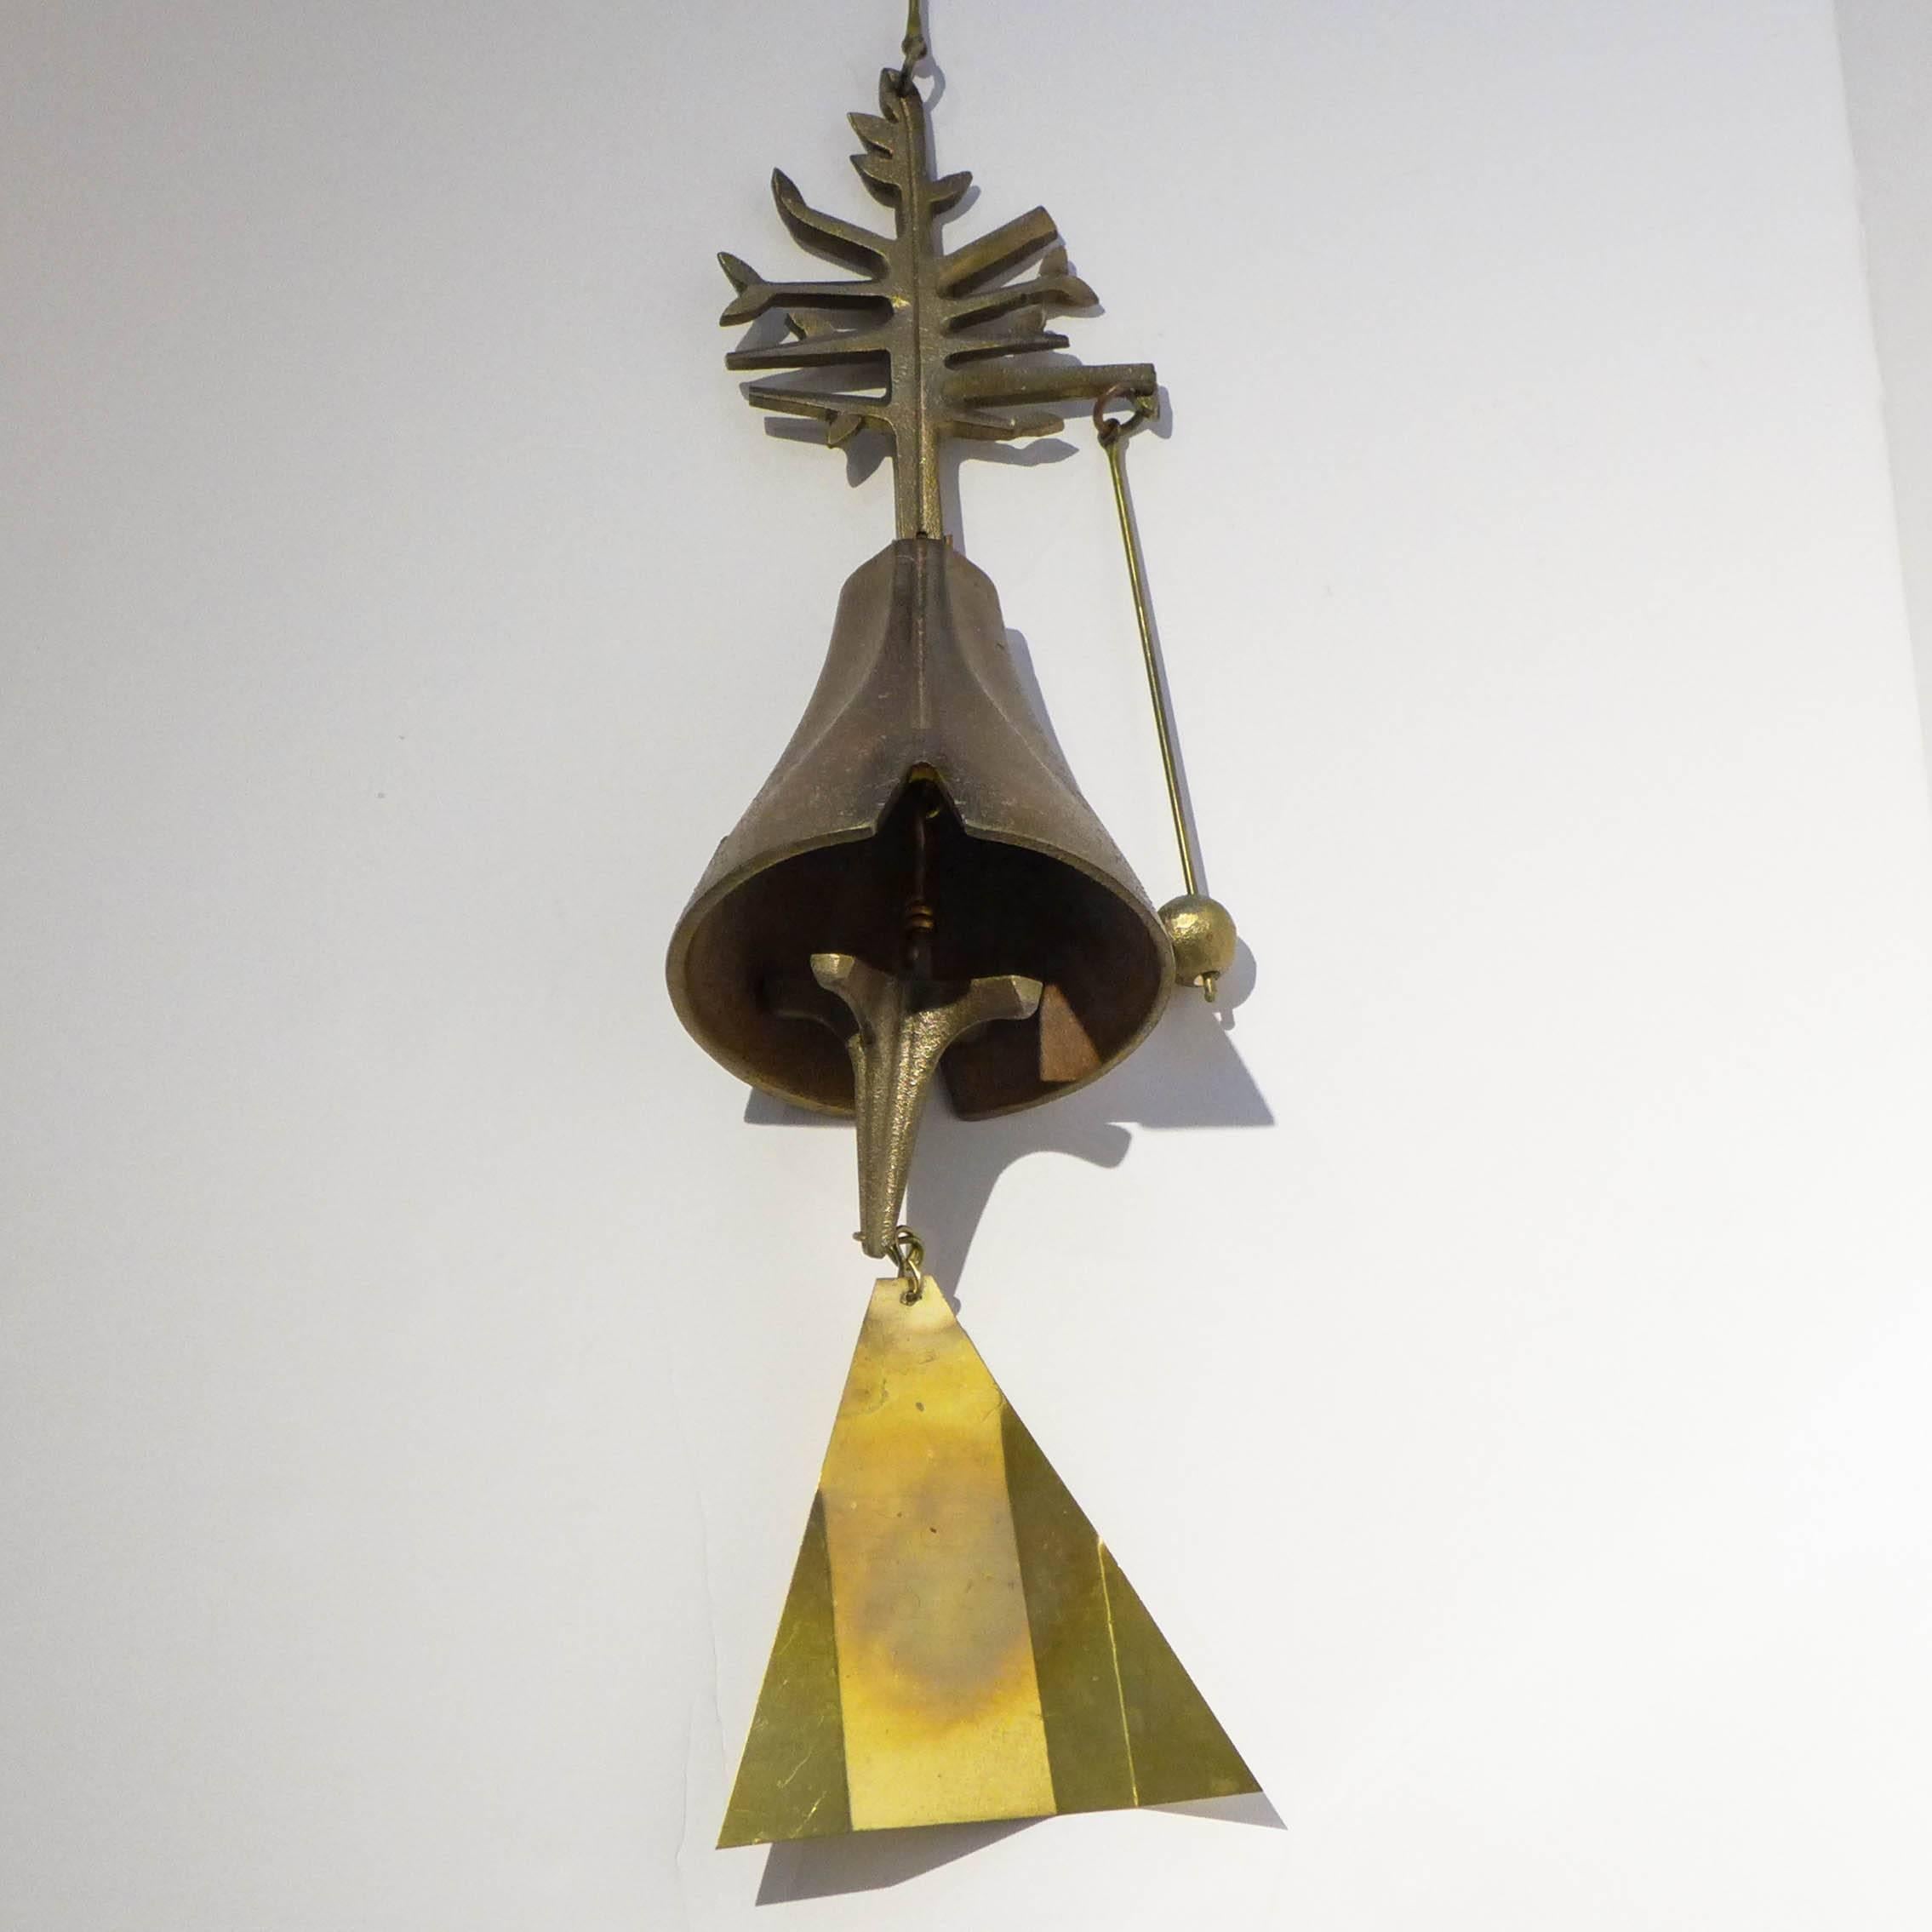 Cast bronze and brass wind chime with a tree-of-life element and a second round clapper adjacent to the bell. A discontinued Paolo Soleri design, produced at Arcosanti, circa 1970s. Soleri was a visionary architect and craftsman whose commercial